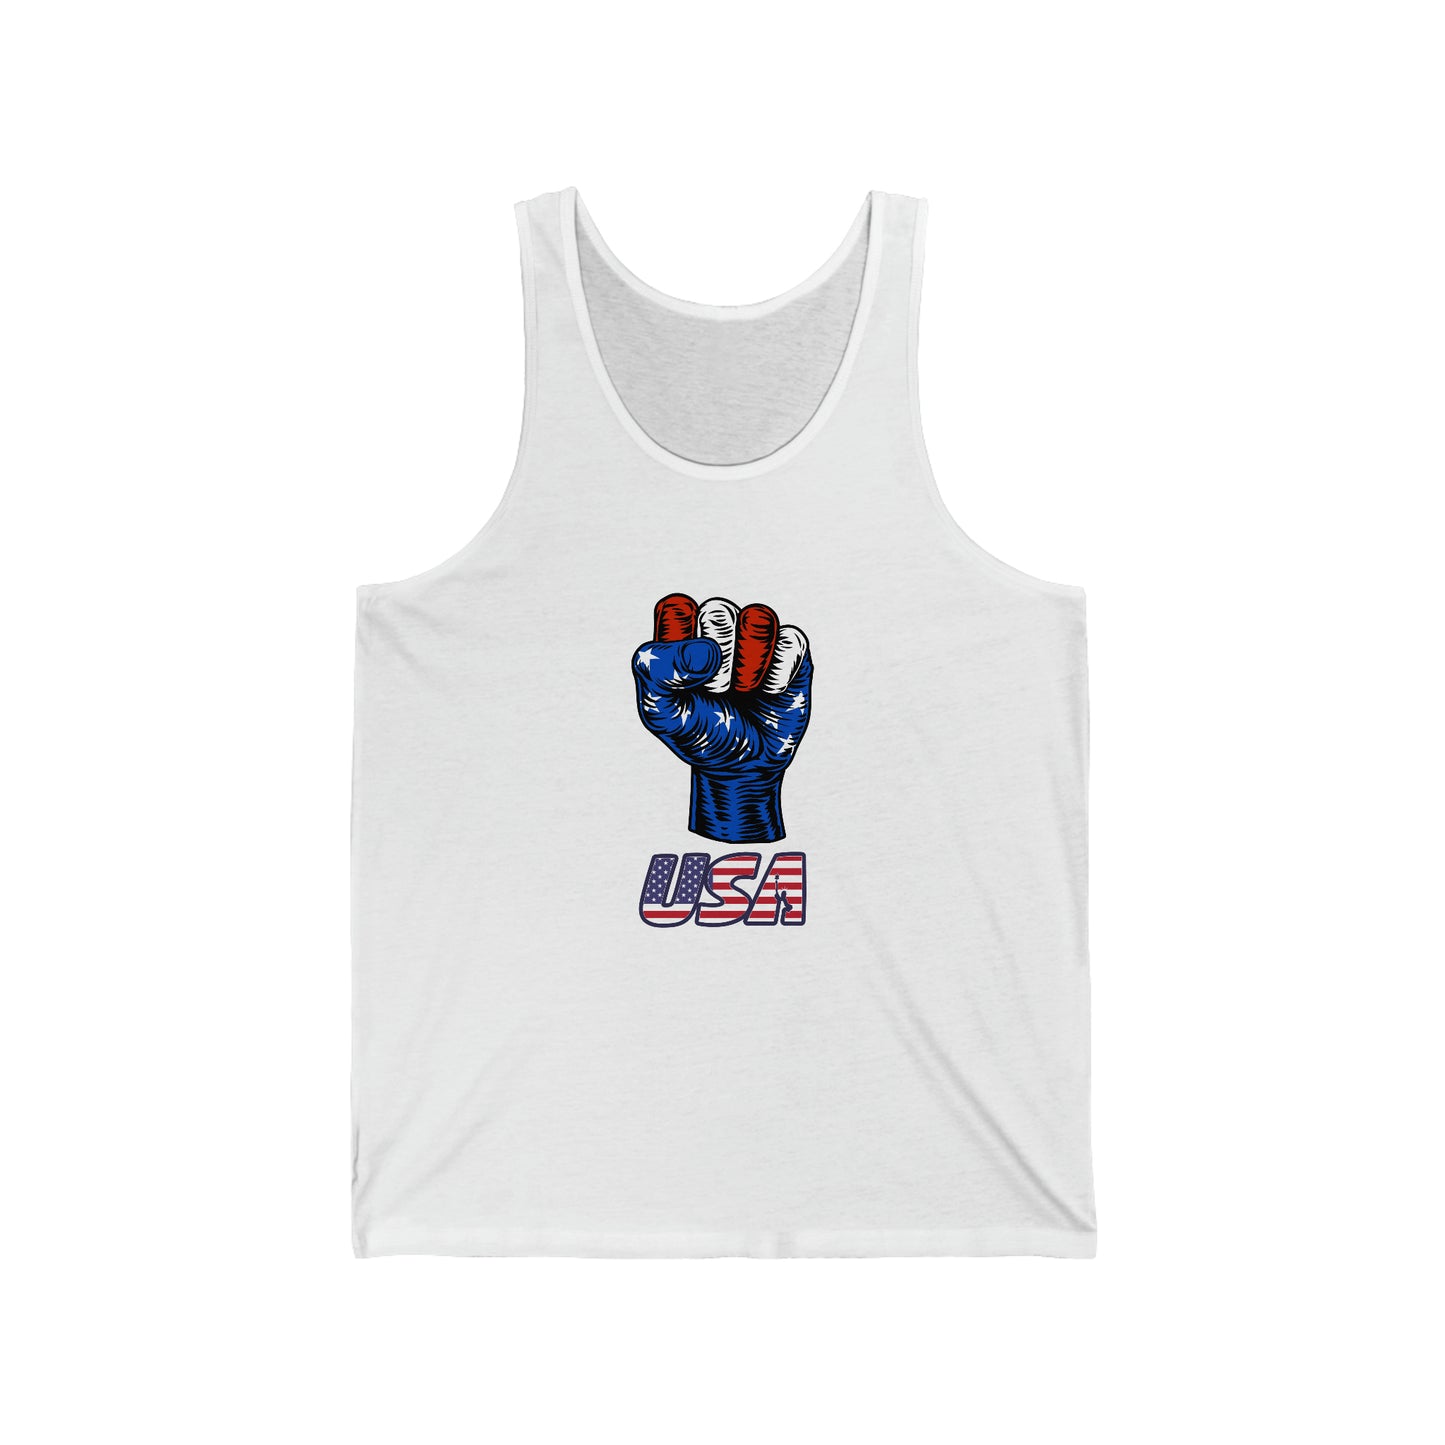 4th of July Unisex Tank Top, Patriotic Flag Tank Top, Memorial Tank Top, Independence Day Tank Top, Unisex Tank Top, Women's Tank Top